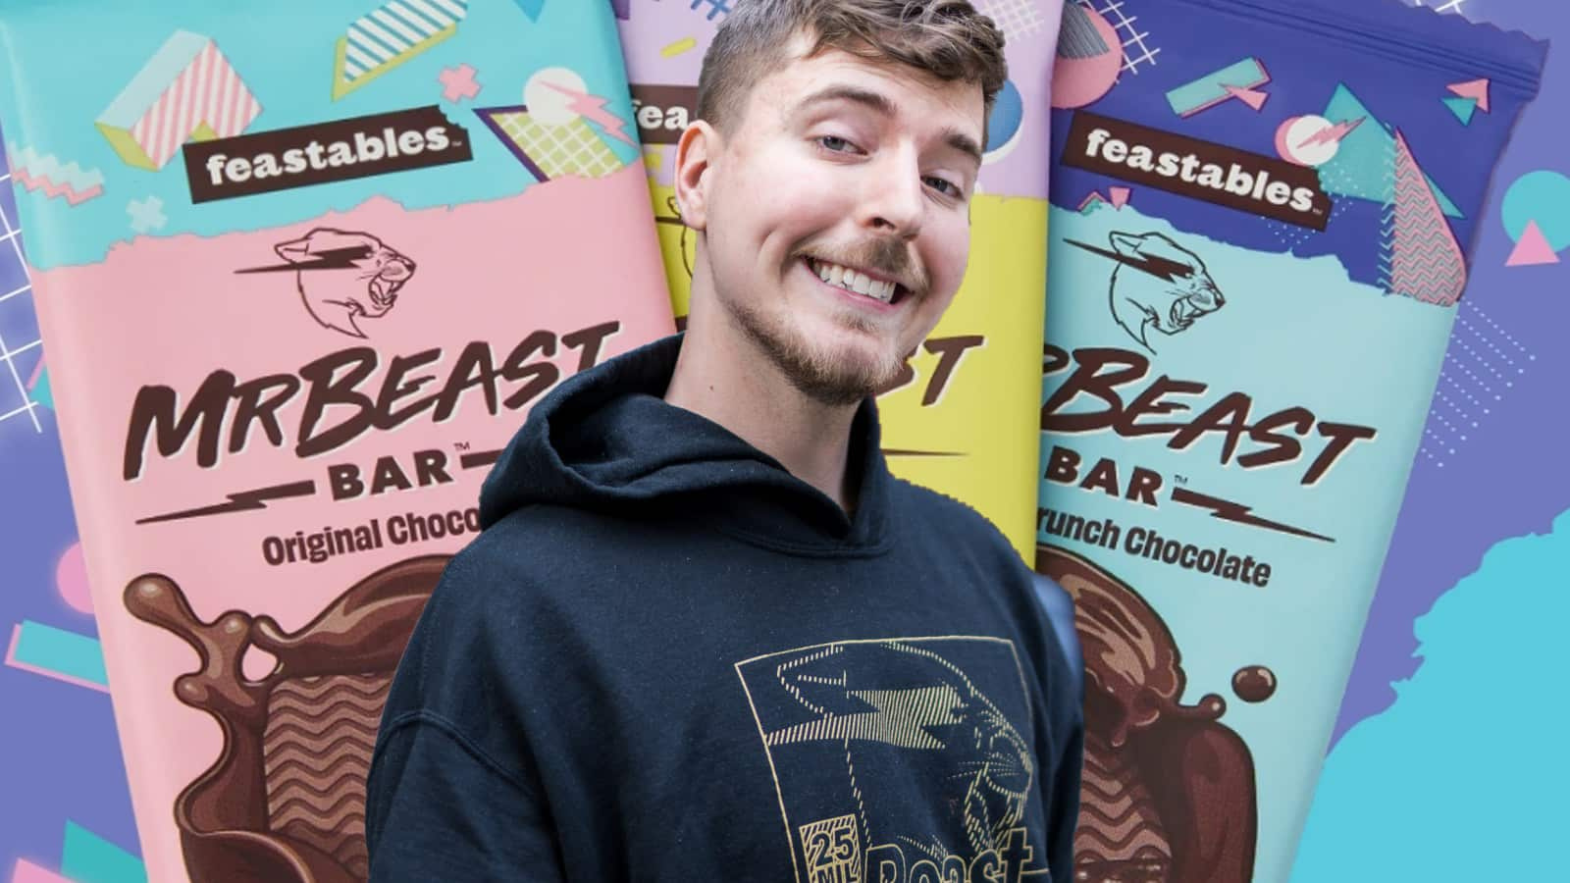 Who is going to be in MrBeast's Squid Game? - Dexerto